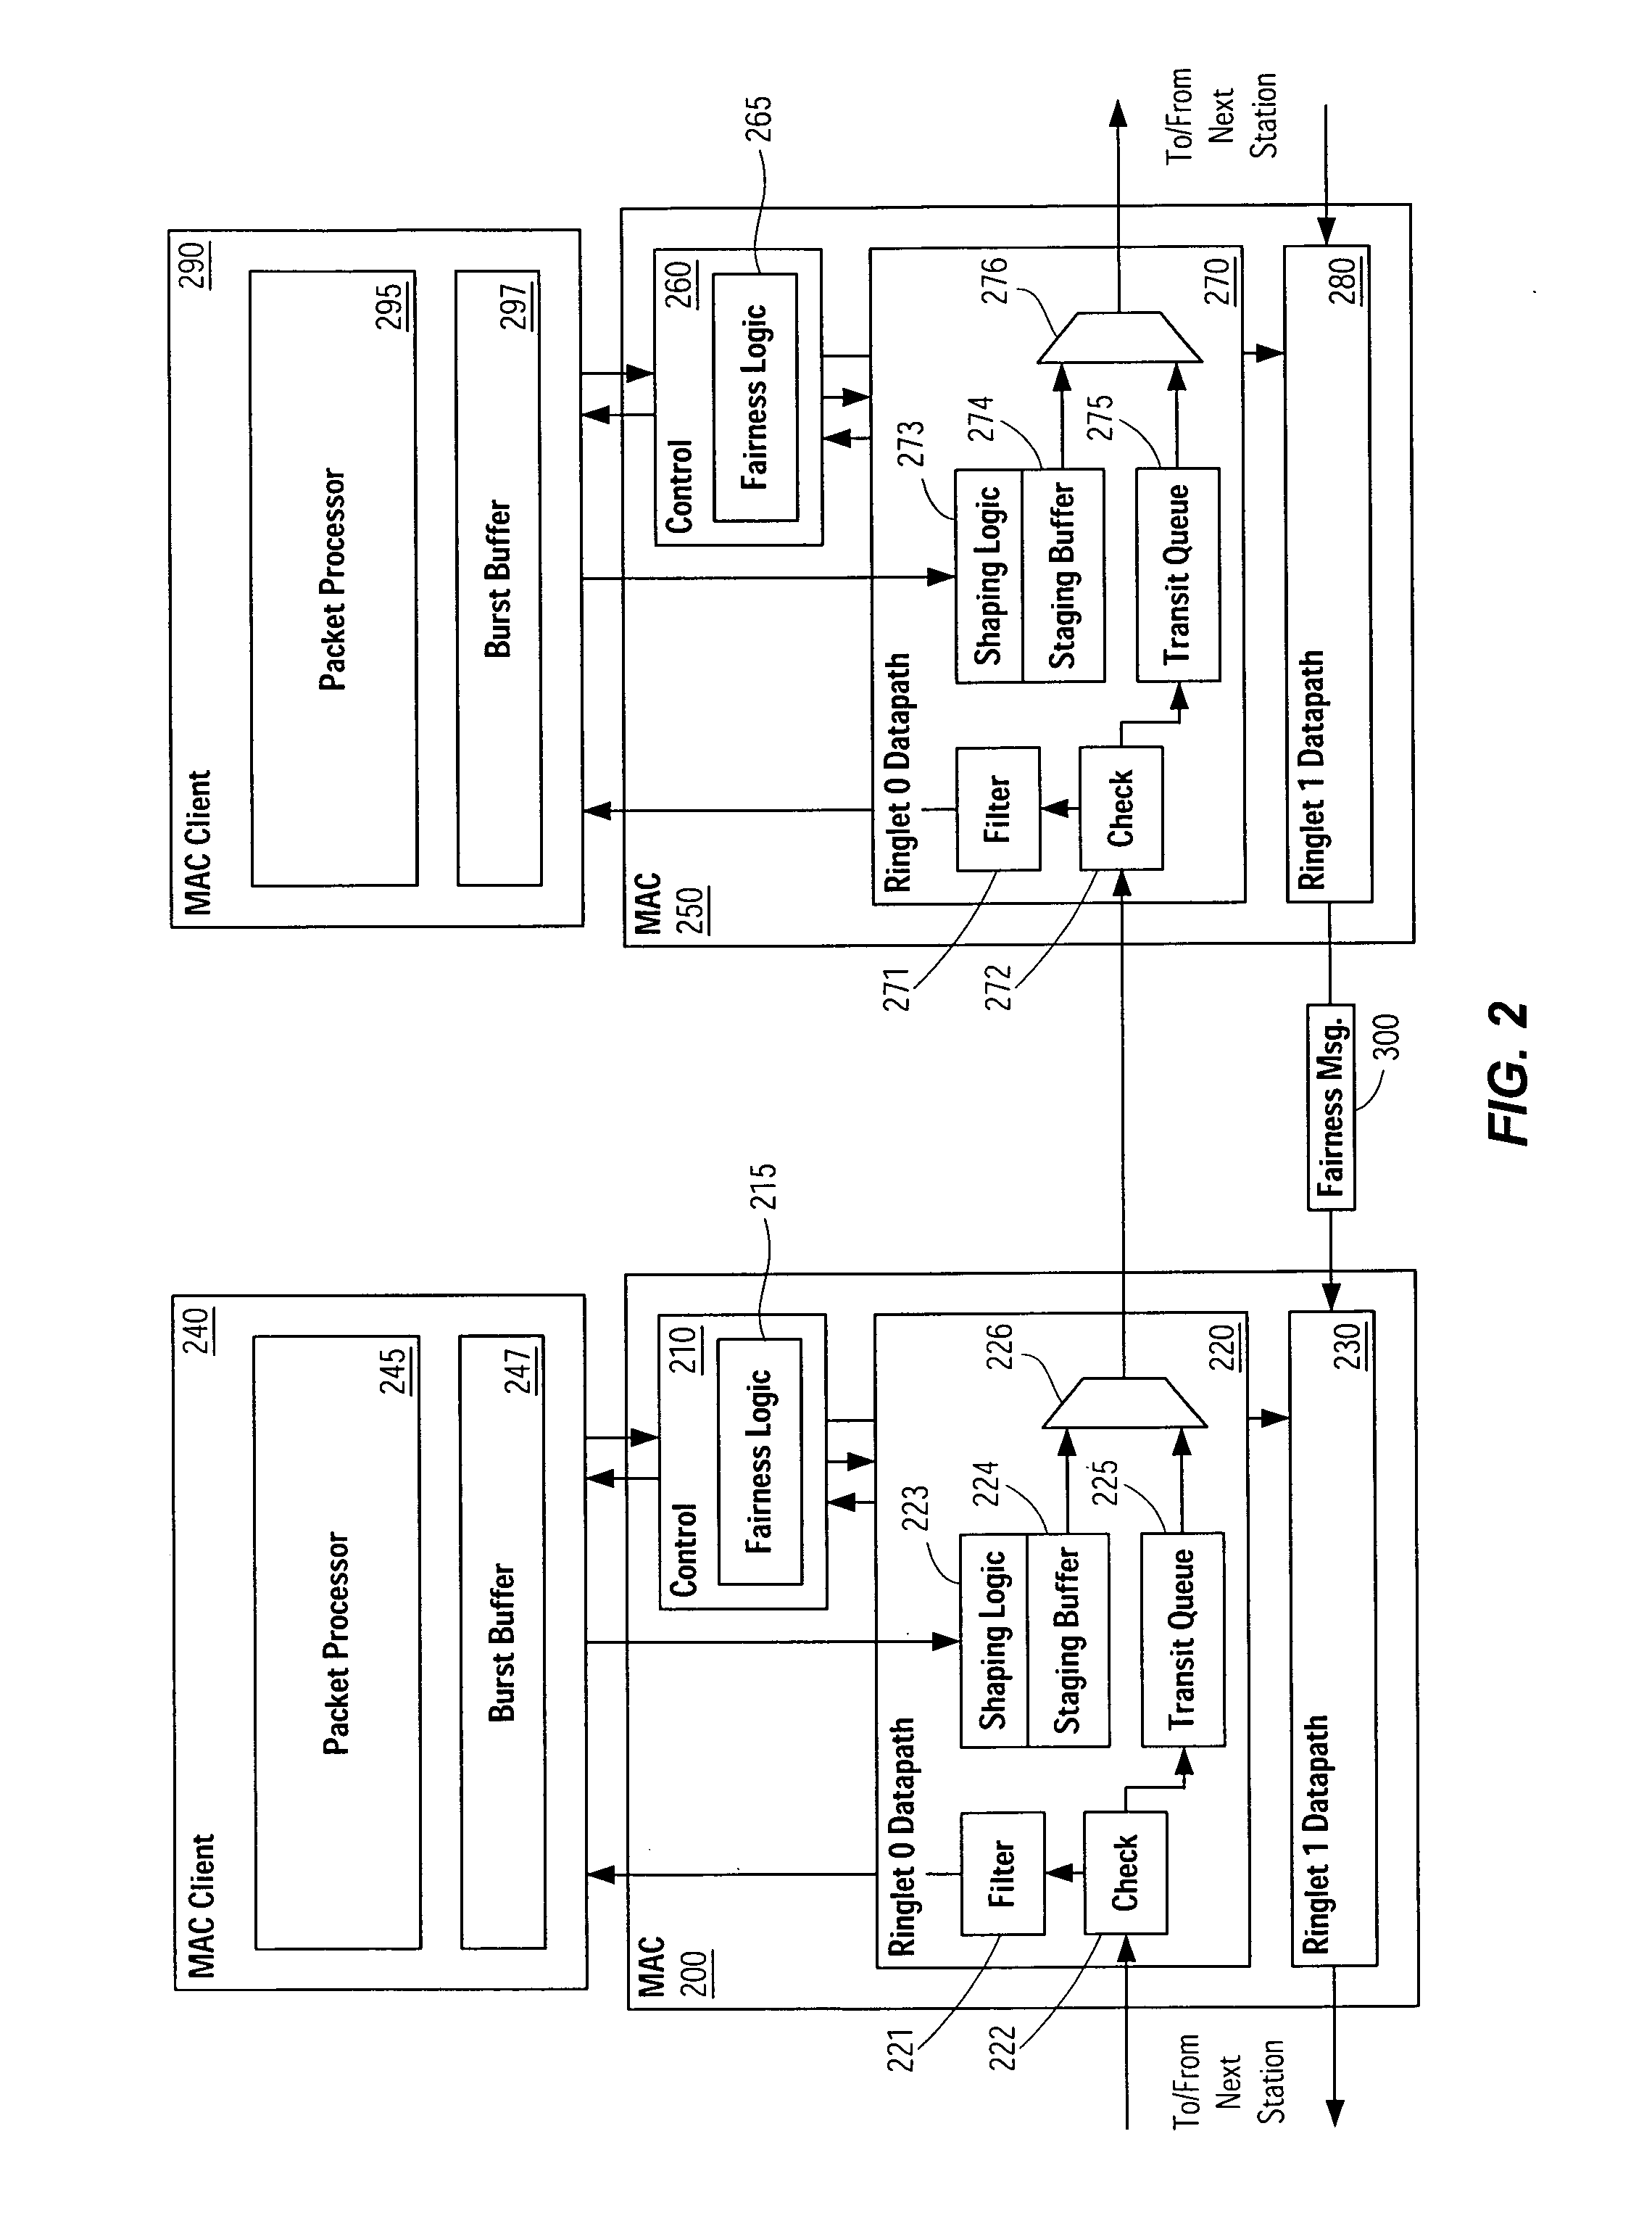 Systems and methods for alleviating client over-subscription in ring networks